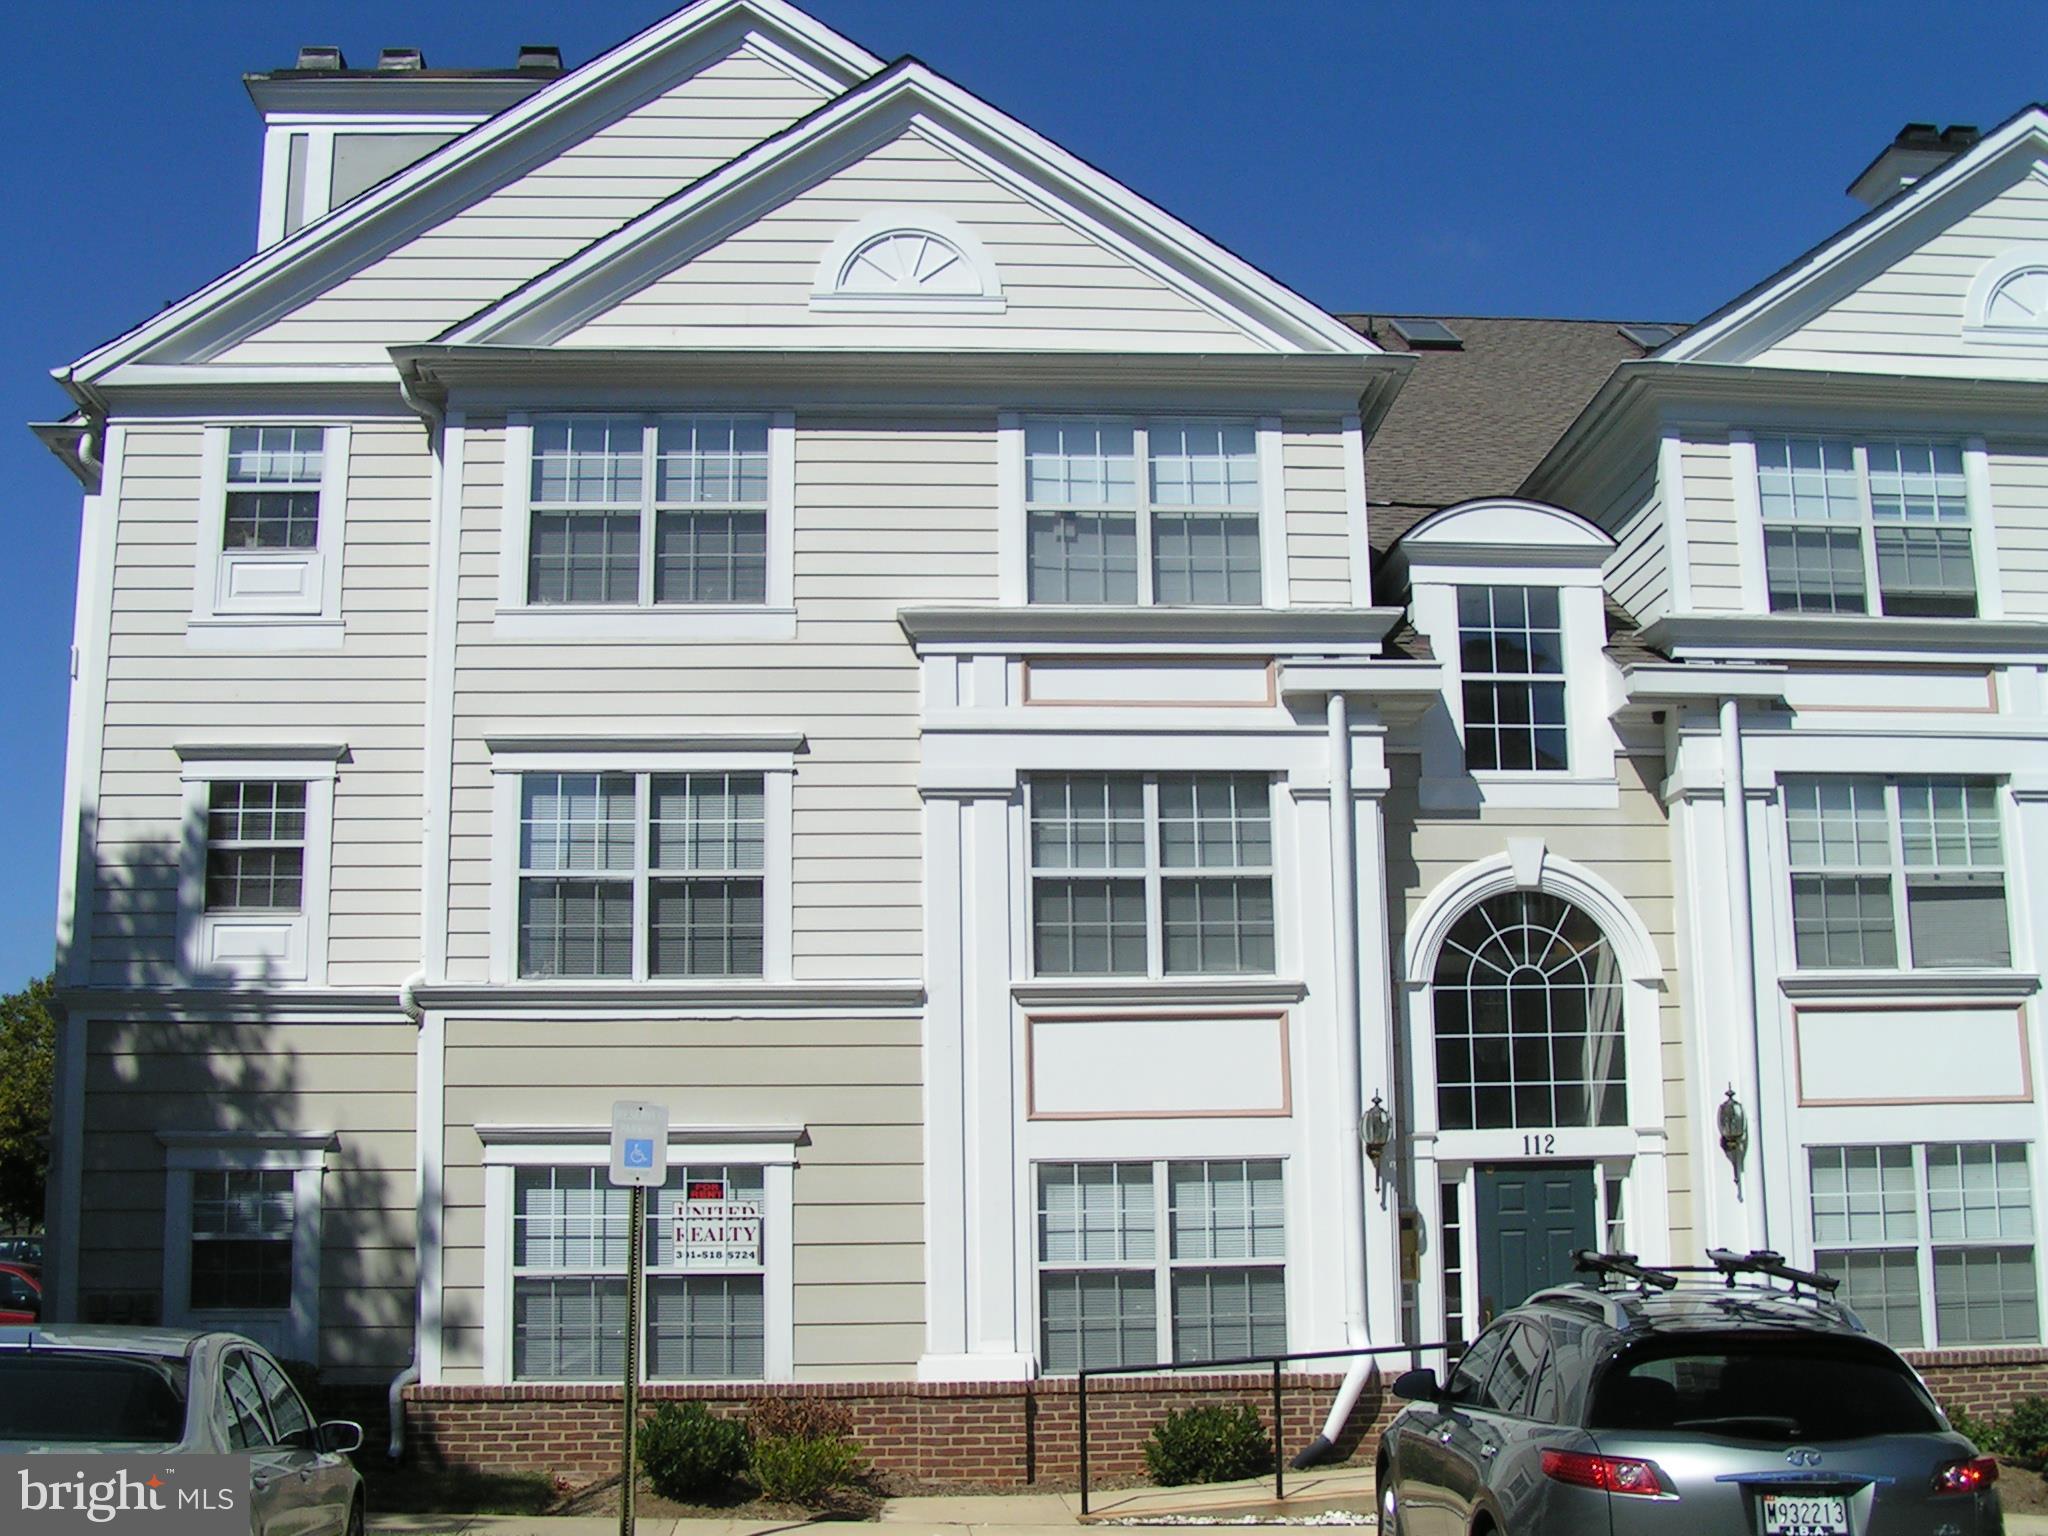 a front view of a residential apartment building with a front door